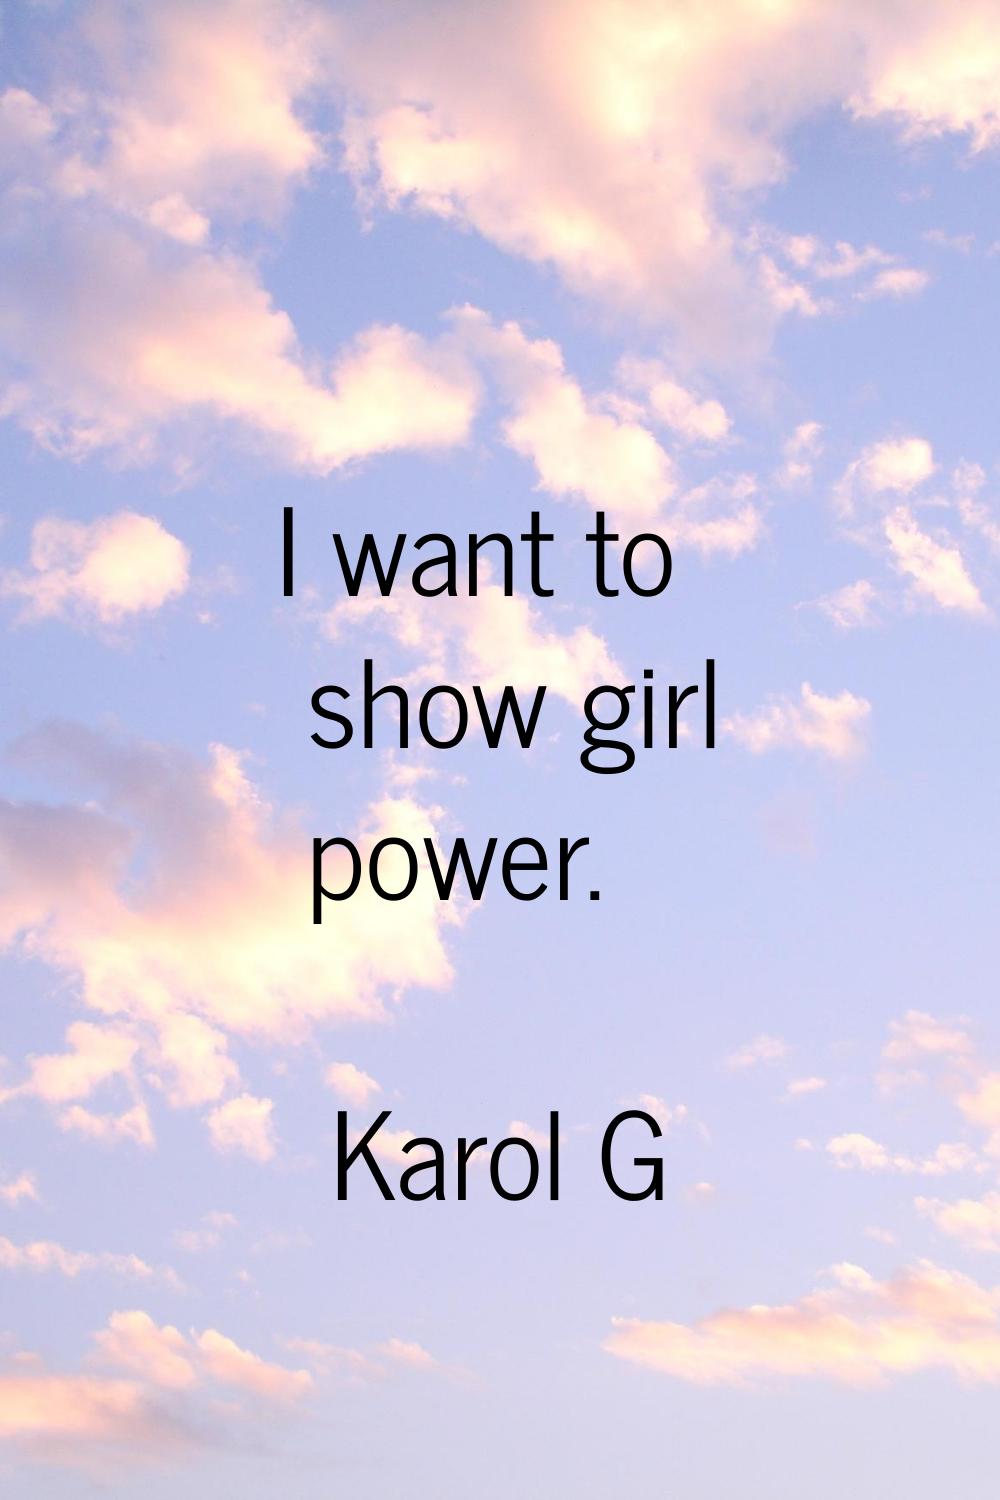 I want to show girl power.